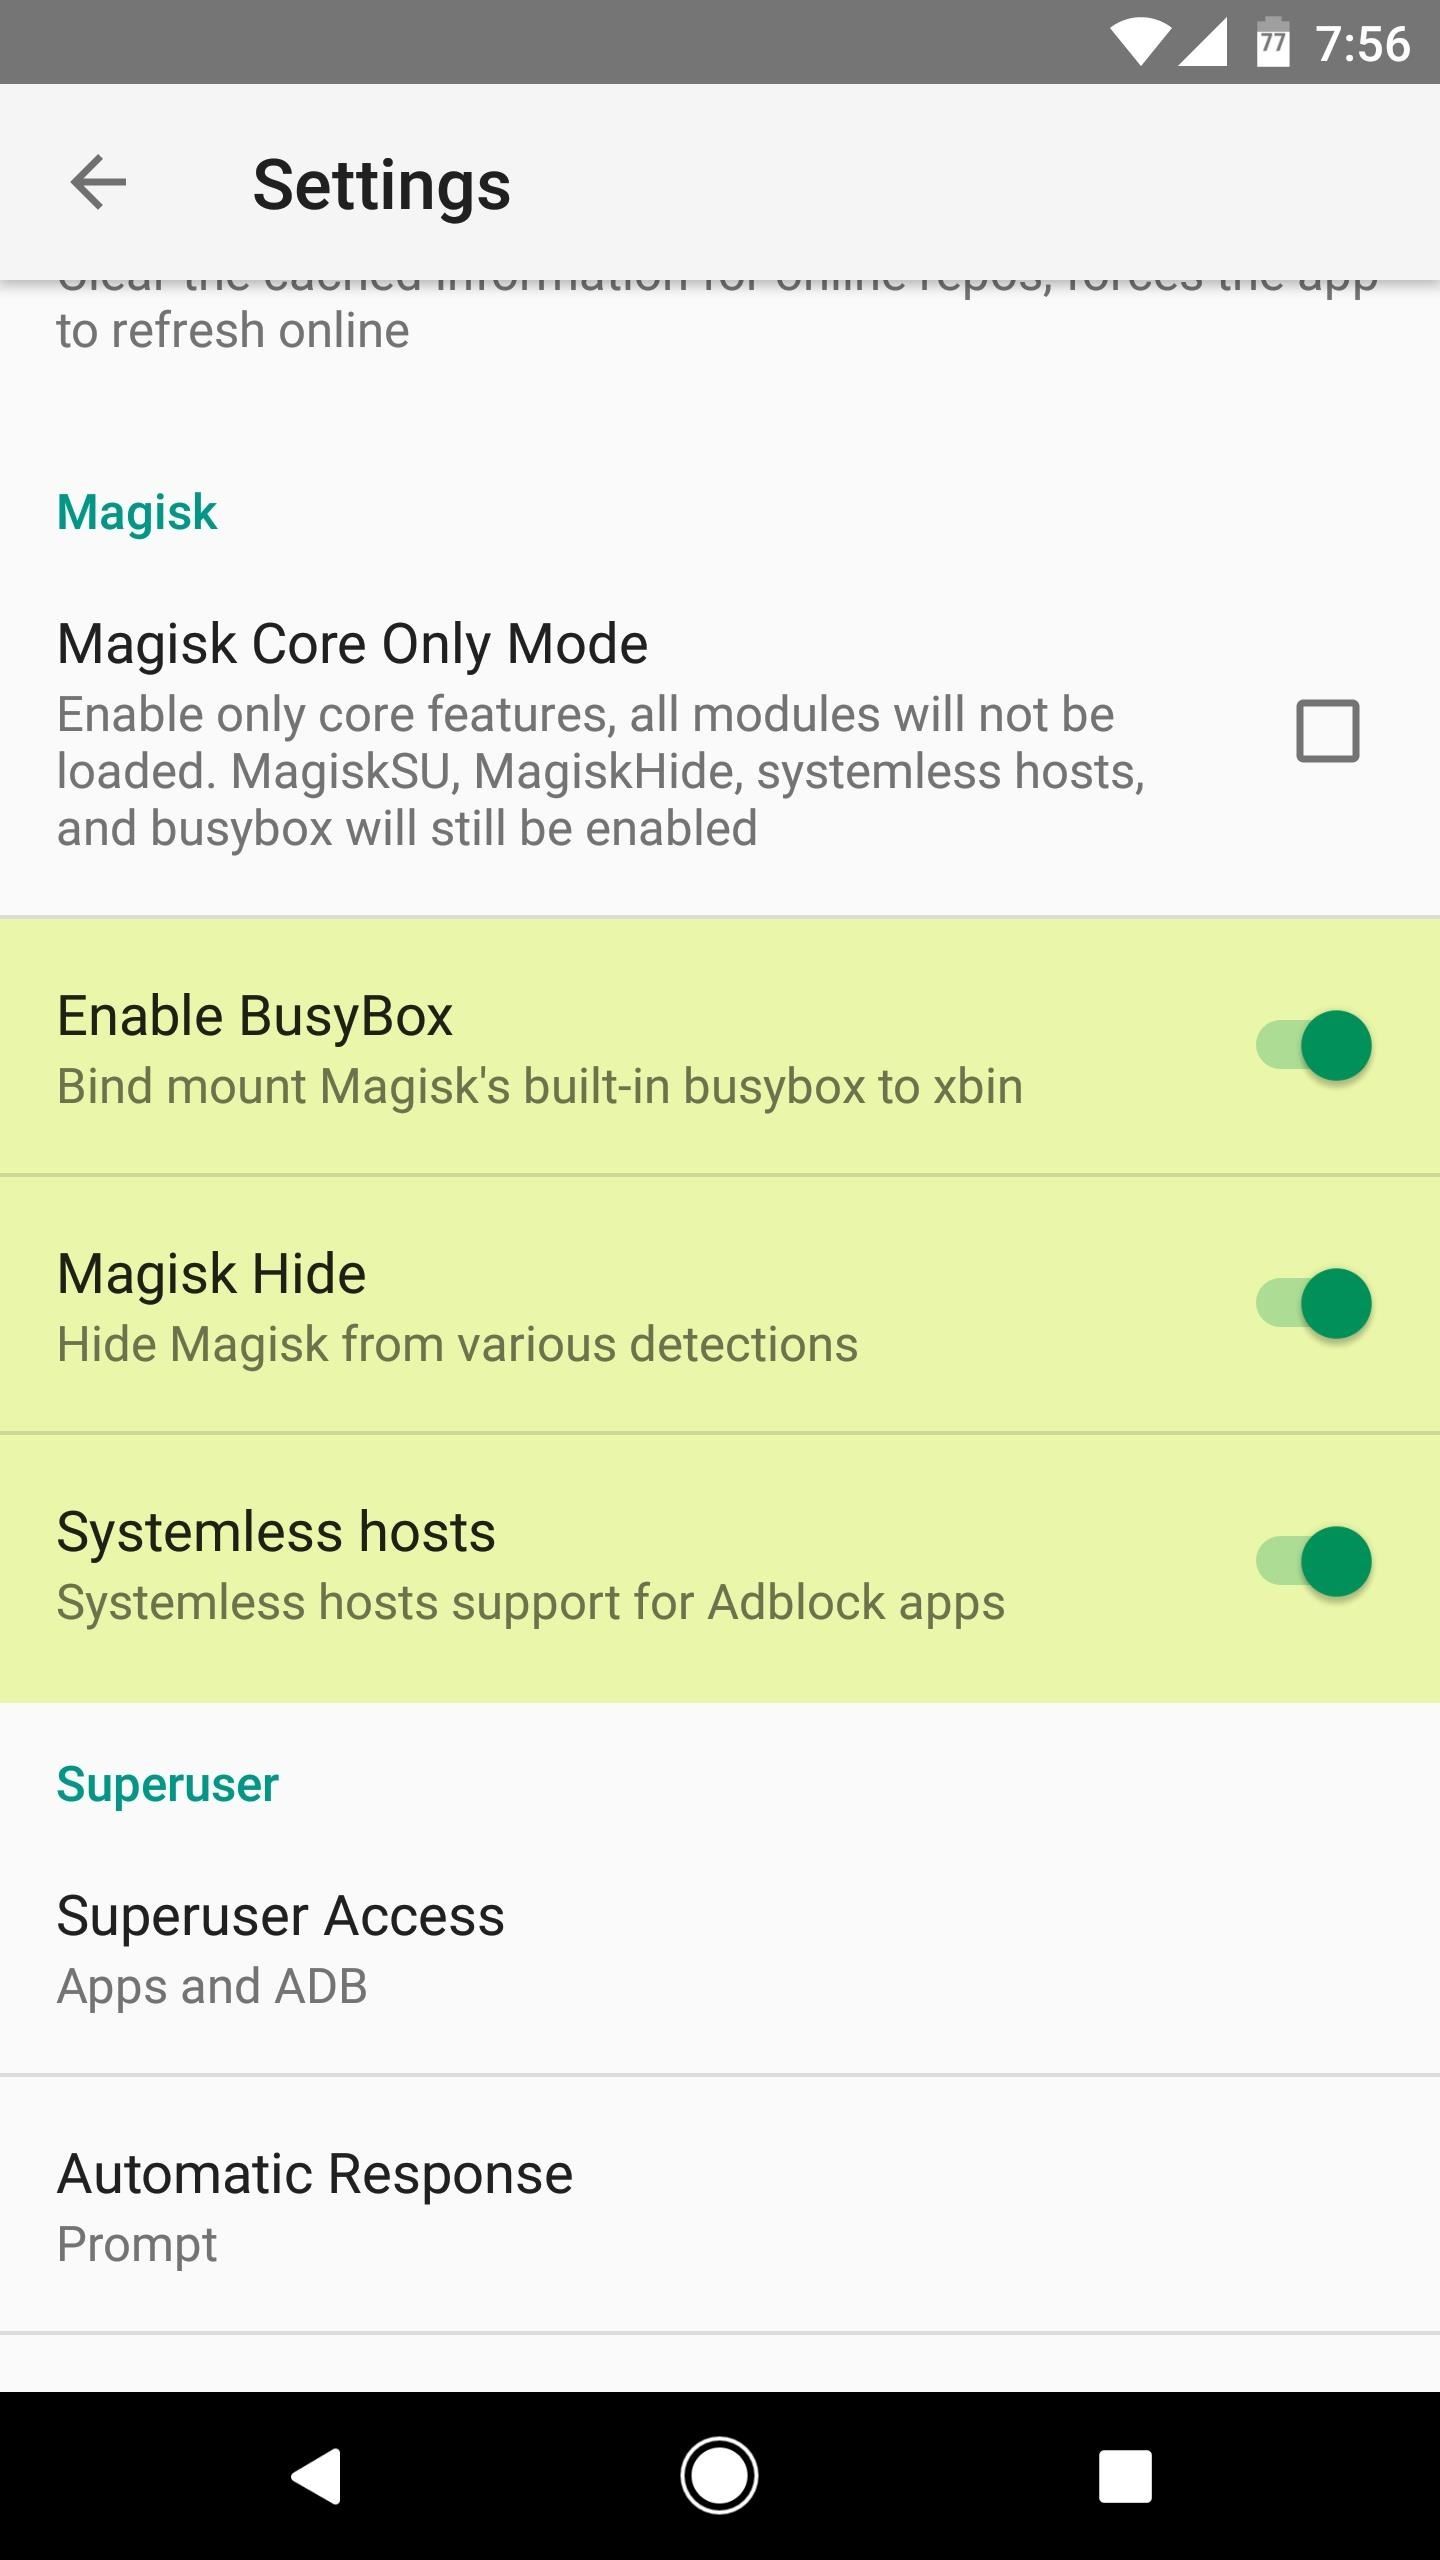 How to Install Magisk on Your Pixel or Pixel XL